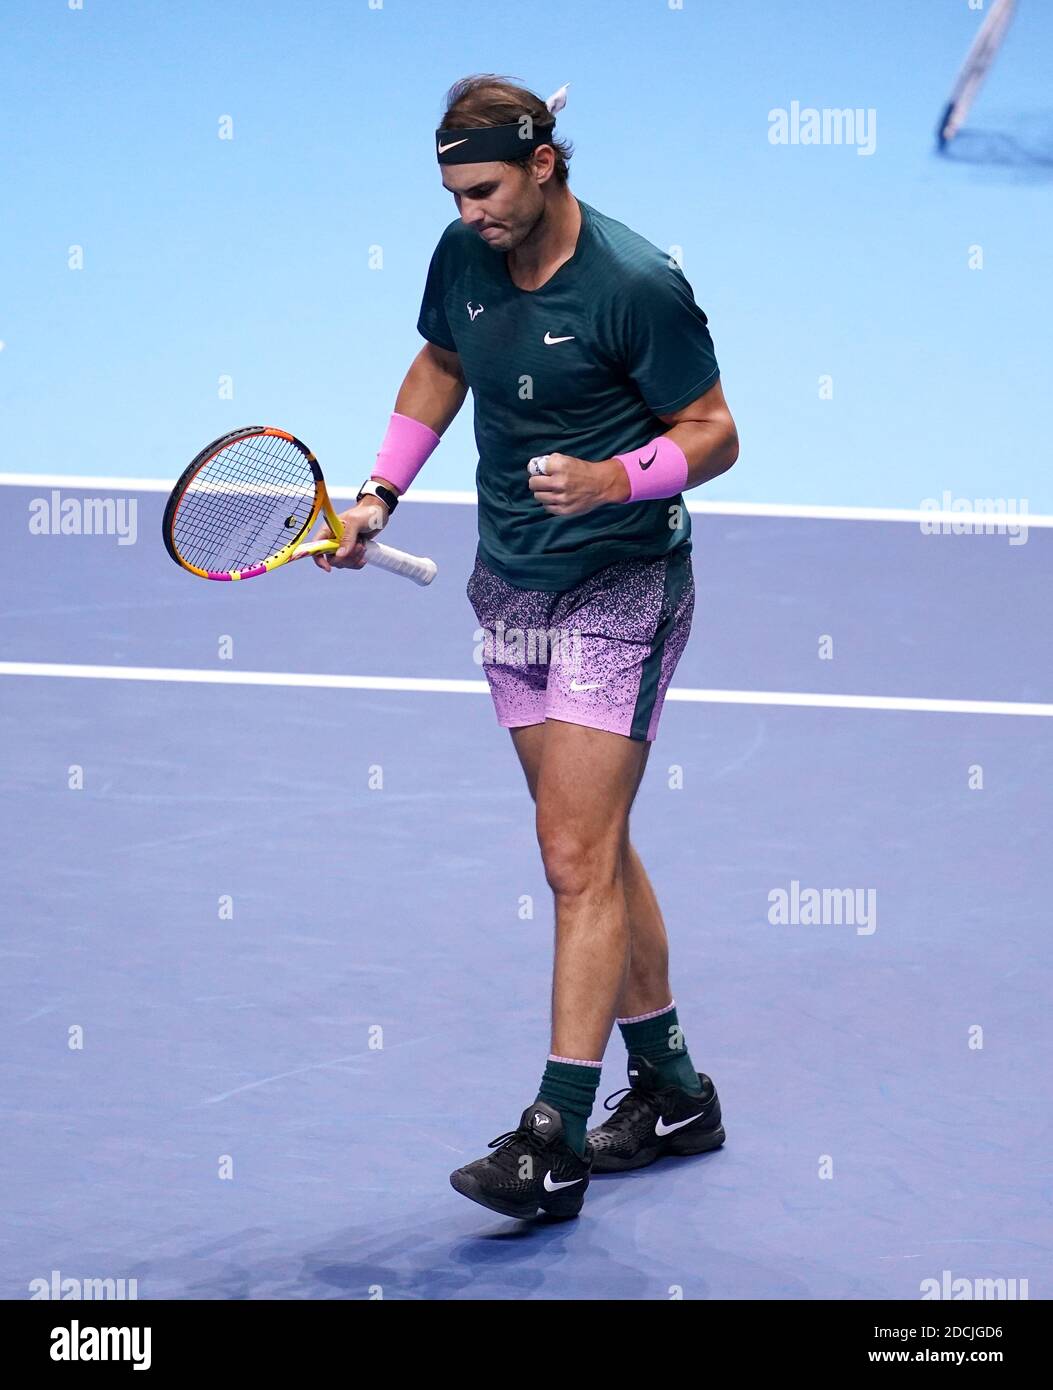 Nitto atp final rafael nadal High Resolution Stock Photography and Images -  Alamy